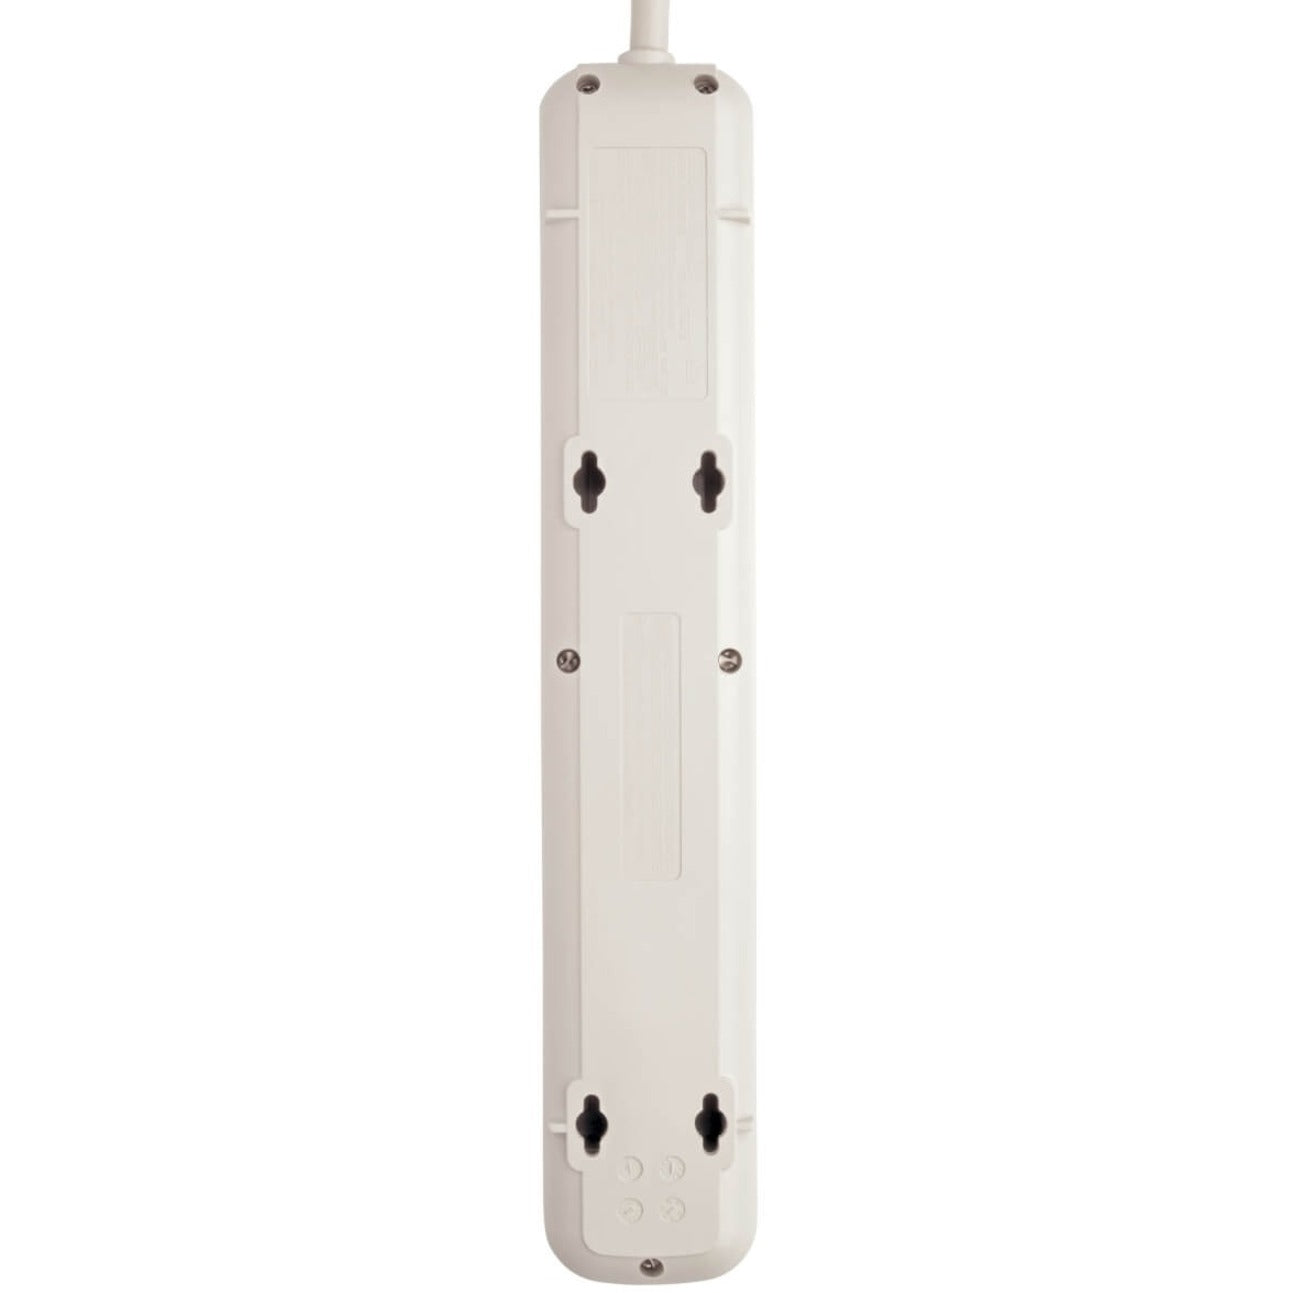 Tripp Lite TLP725 Protect It! Economical AC 7-Outlet Surge Protector, 1080 Joules, 25' Cord, White